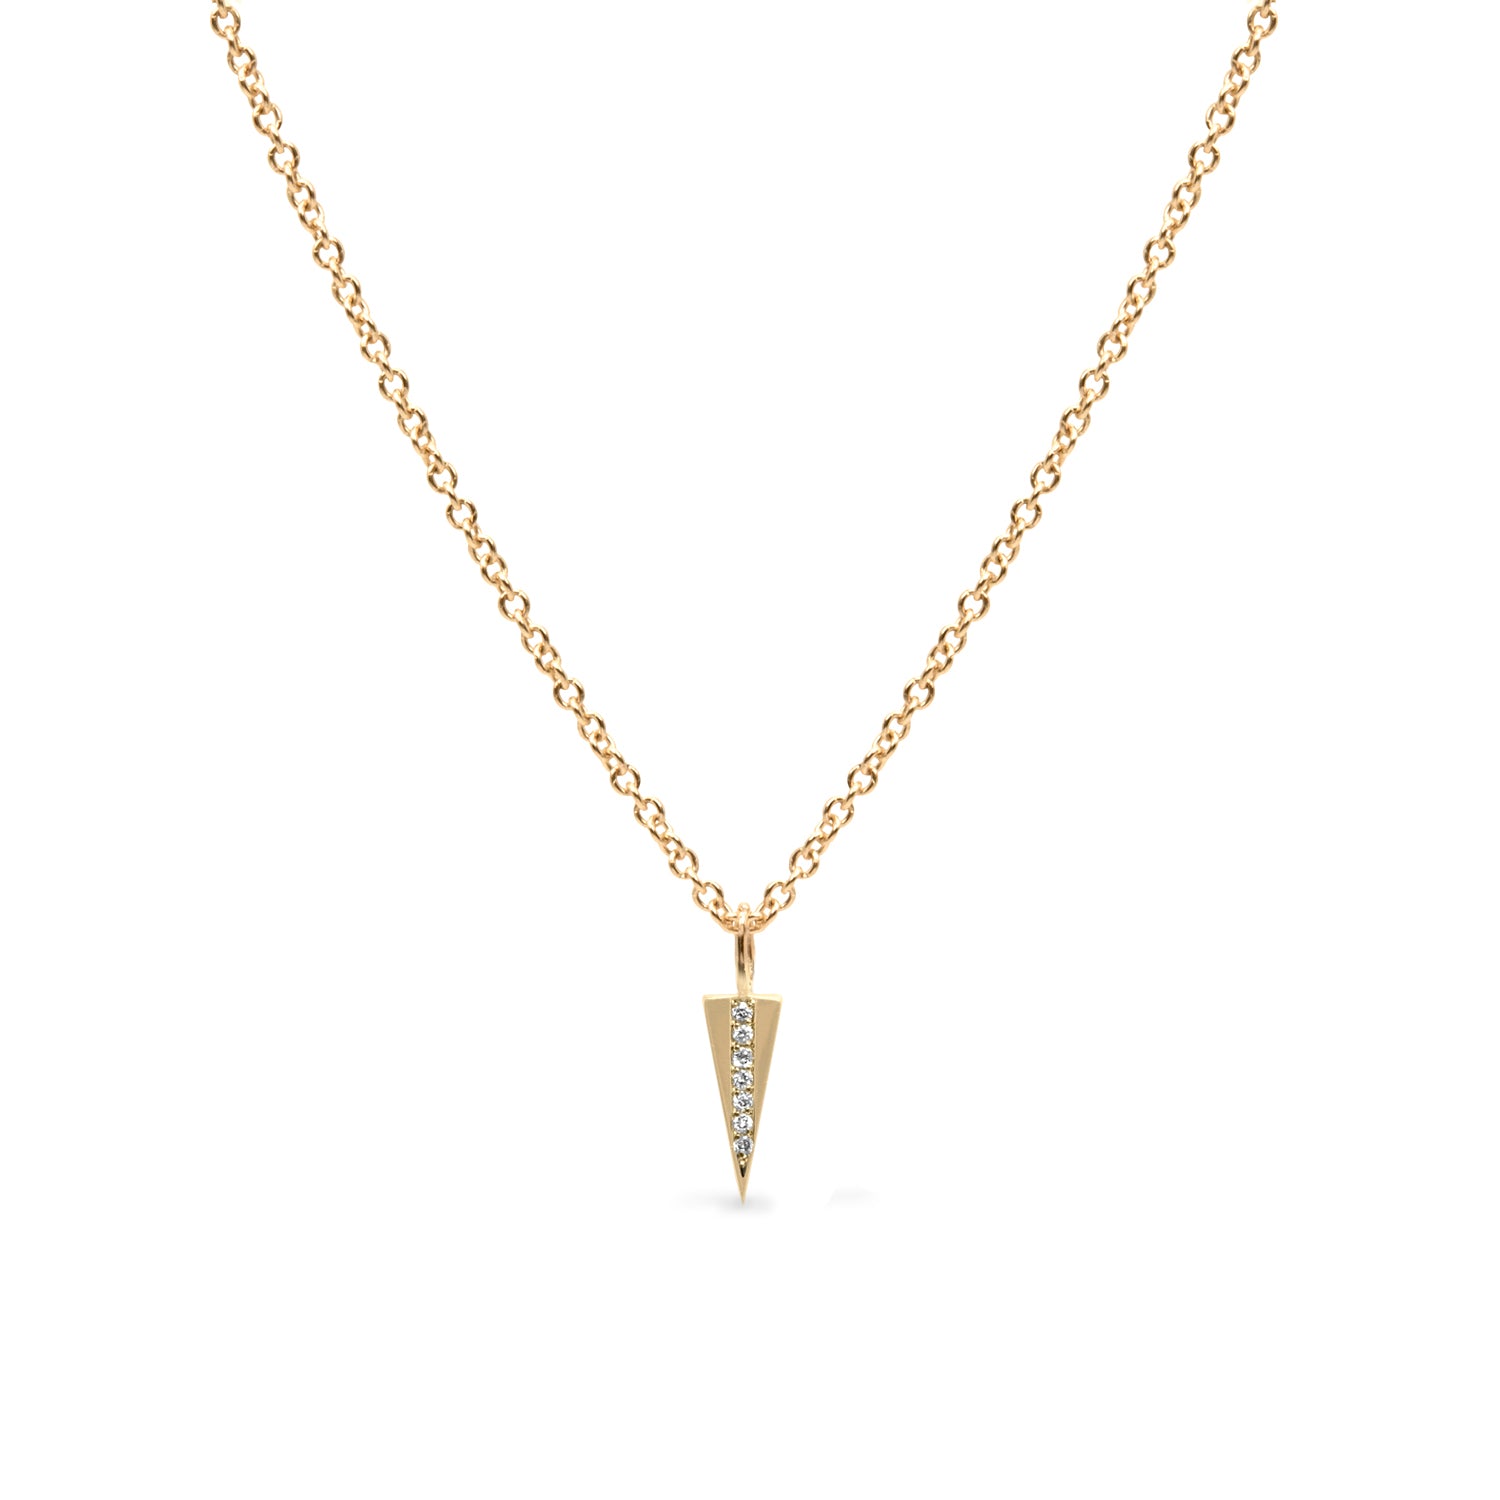 Triangle necklace set with row of diamonds